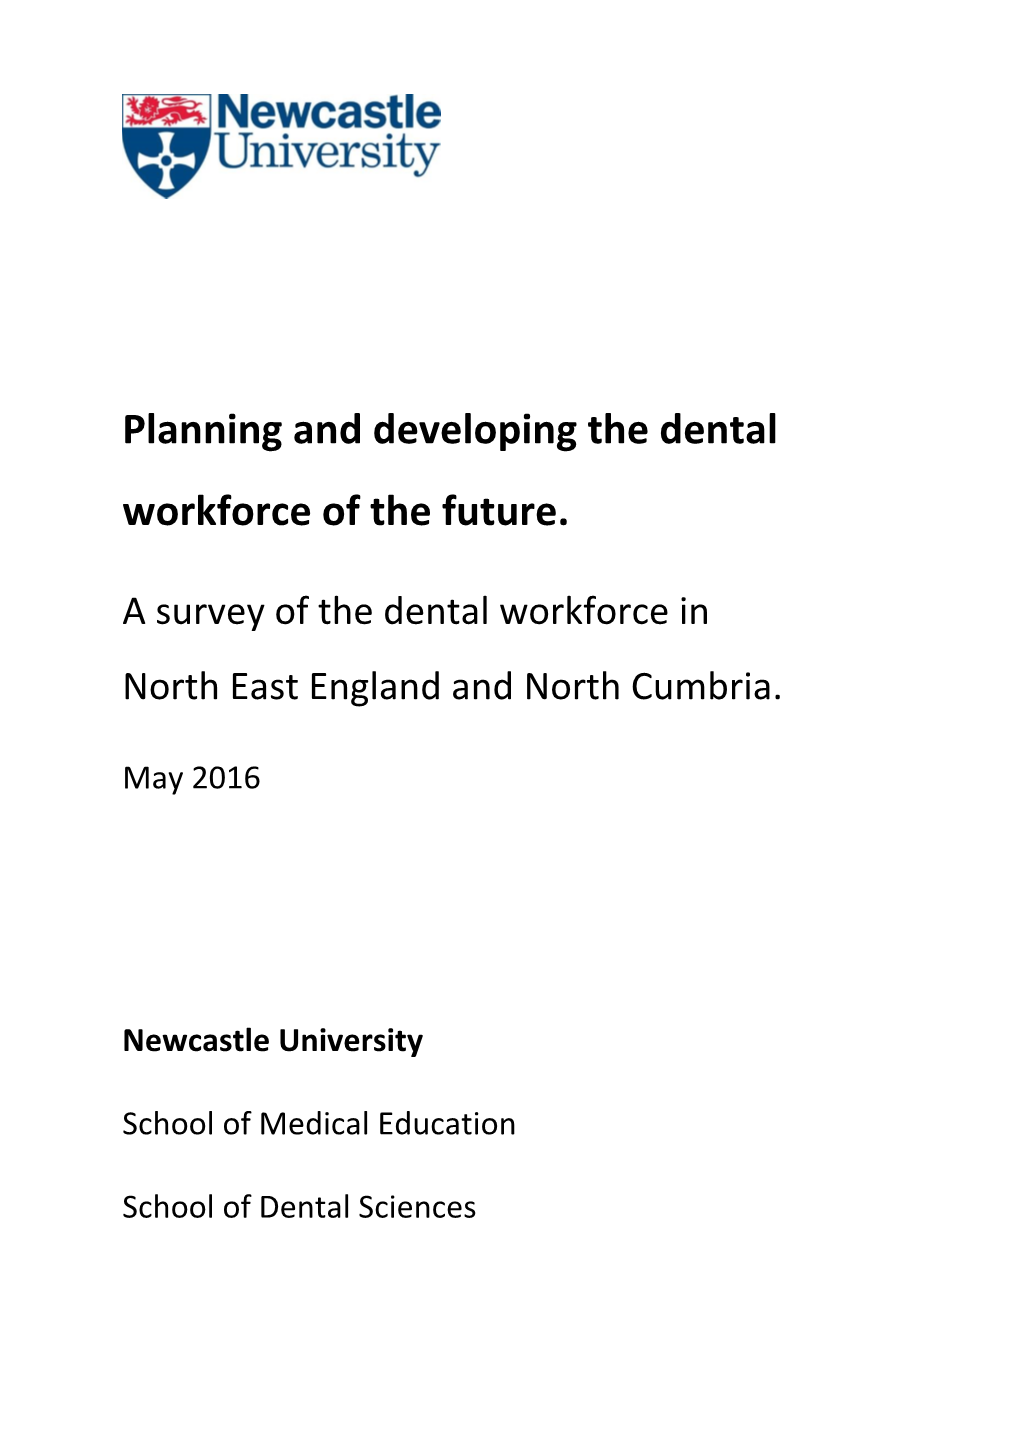 Planning and Developing the Dental Workforce of the Future